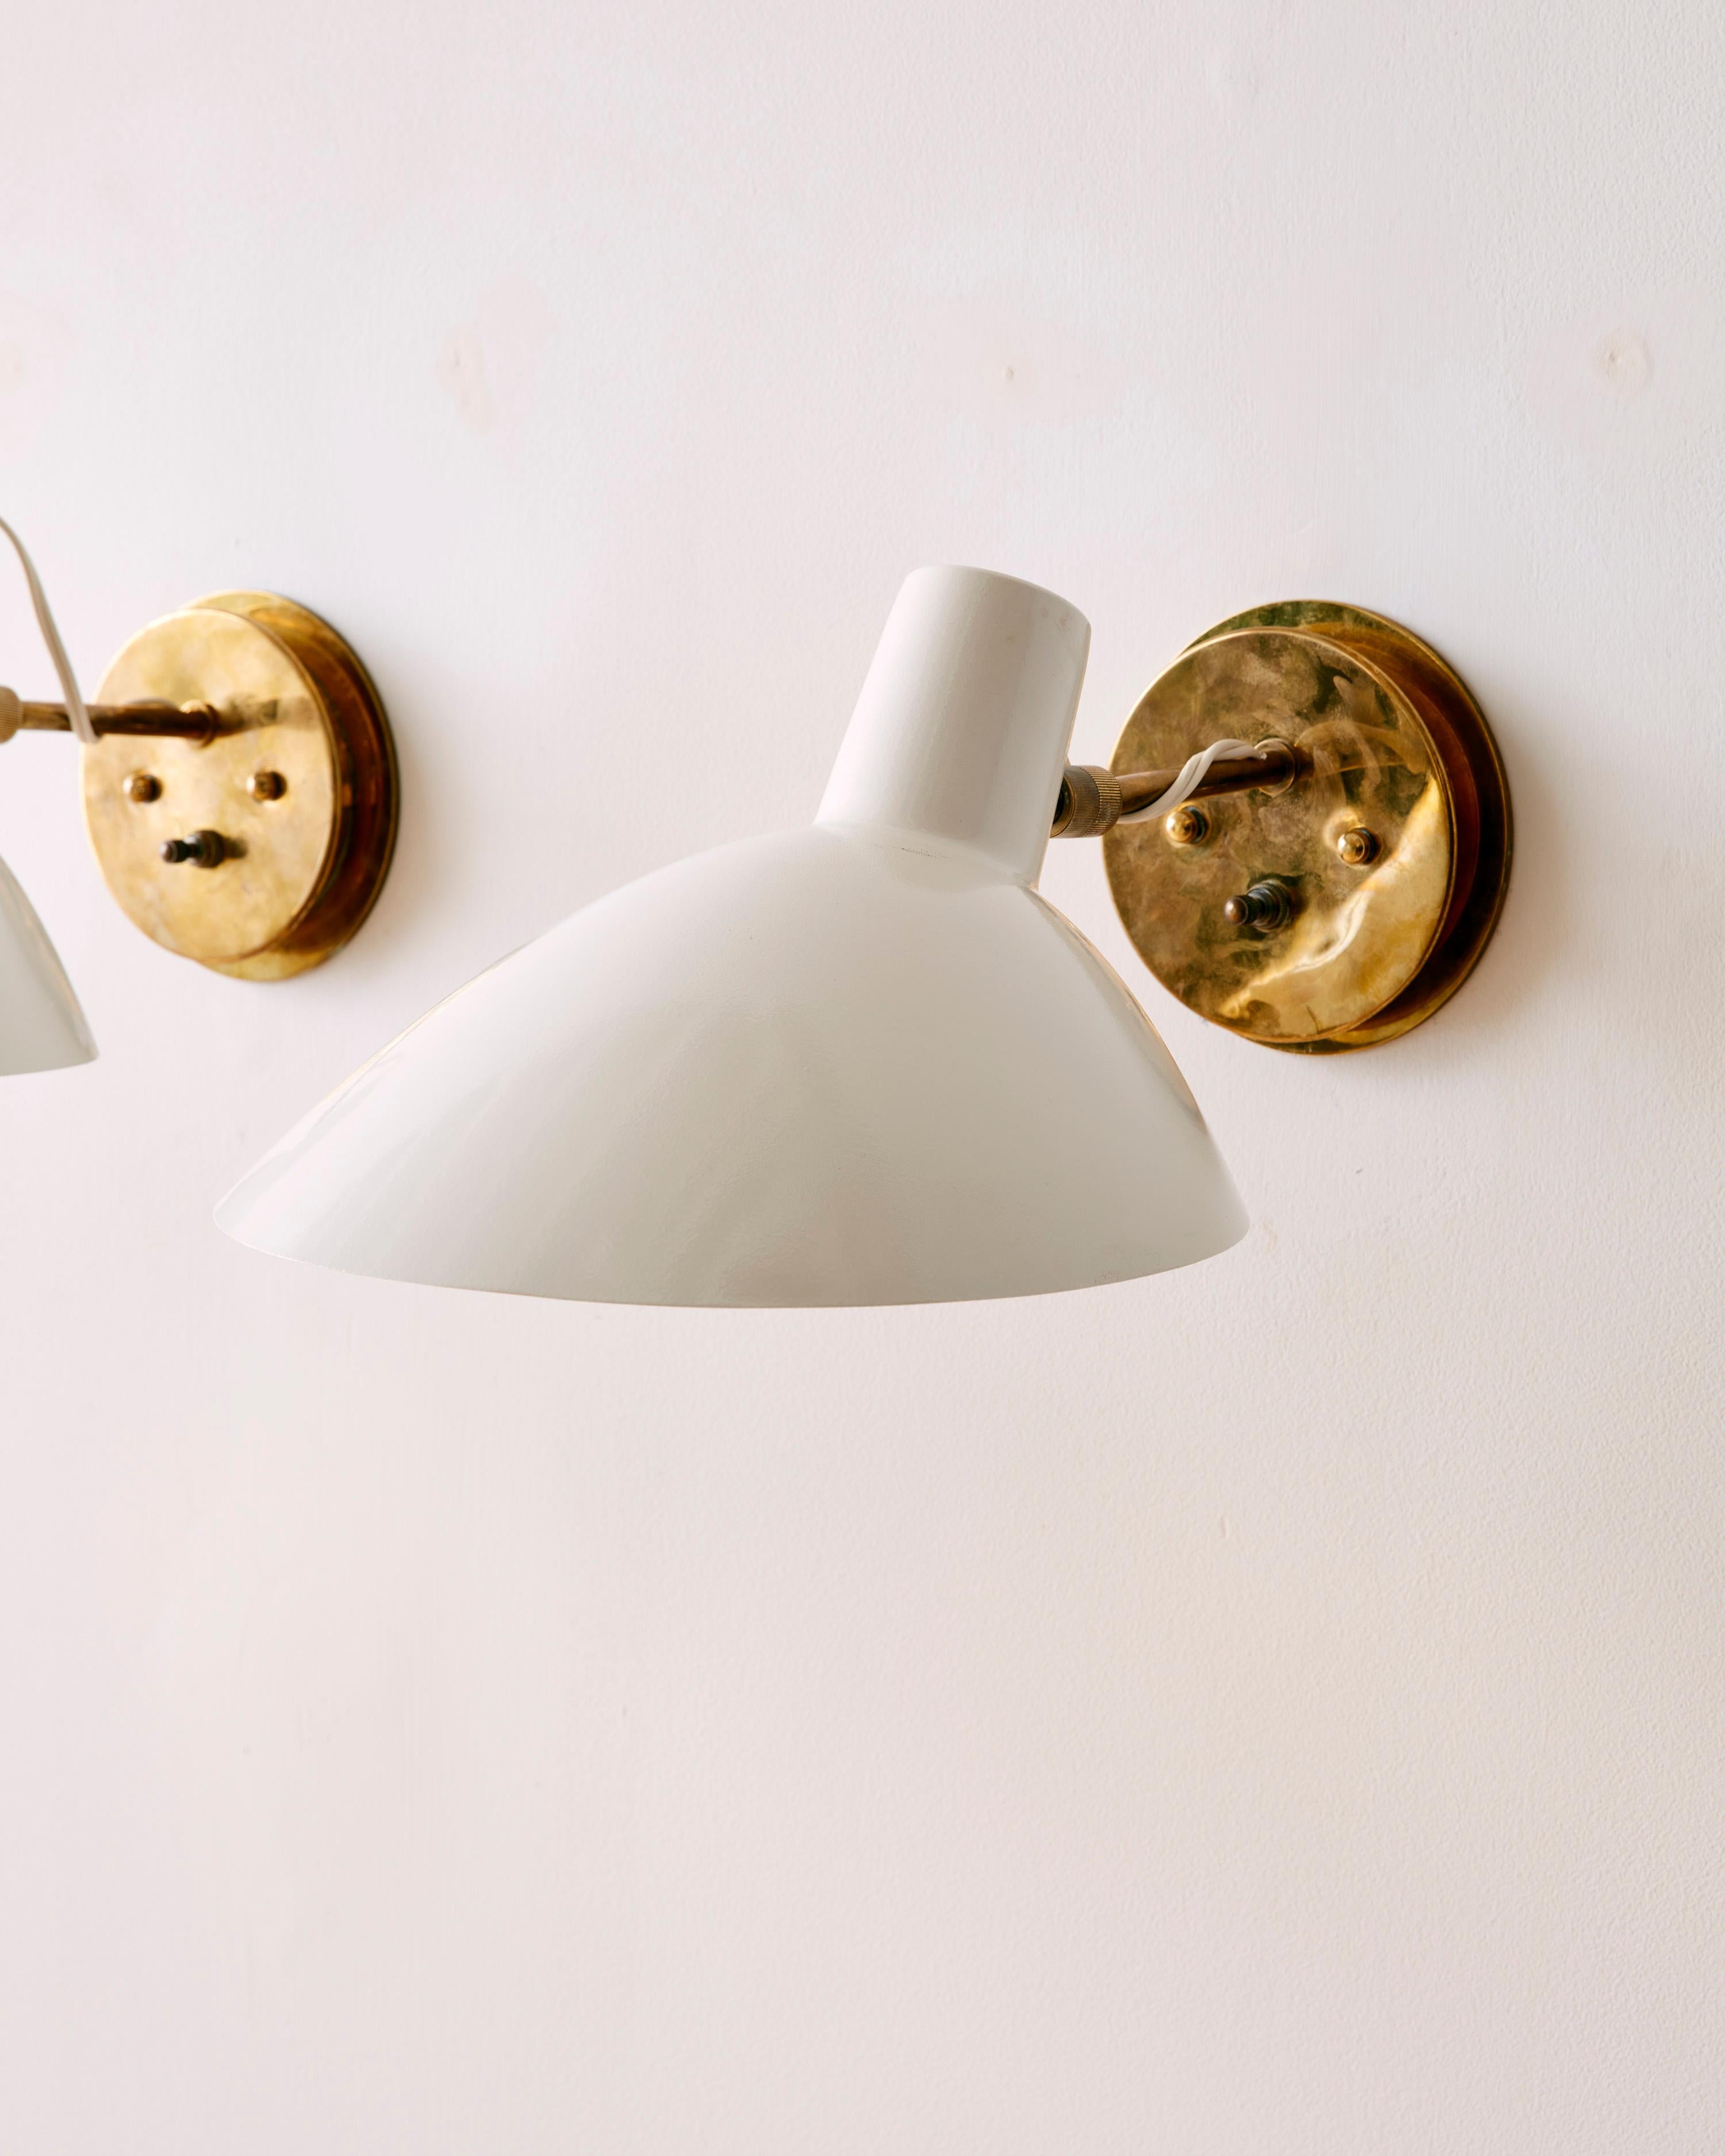 A Pair of Articulated Wall Sconces by Vittoriano Vigano for Arteluce with enameled metal shades and brass hardware. 

Vittoriano Viganò (1919–1995) was an Italian architect and lighting designer known for his innovative contributions to mid-century